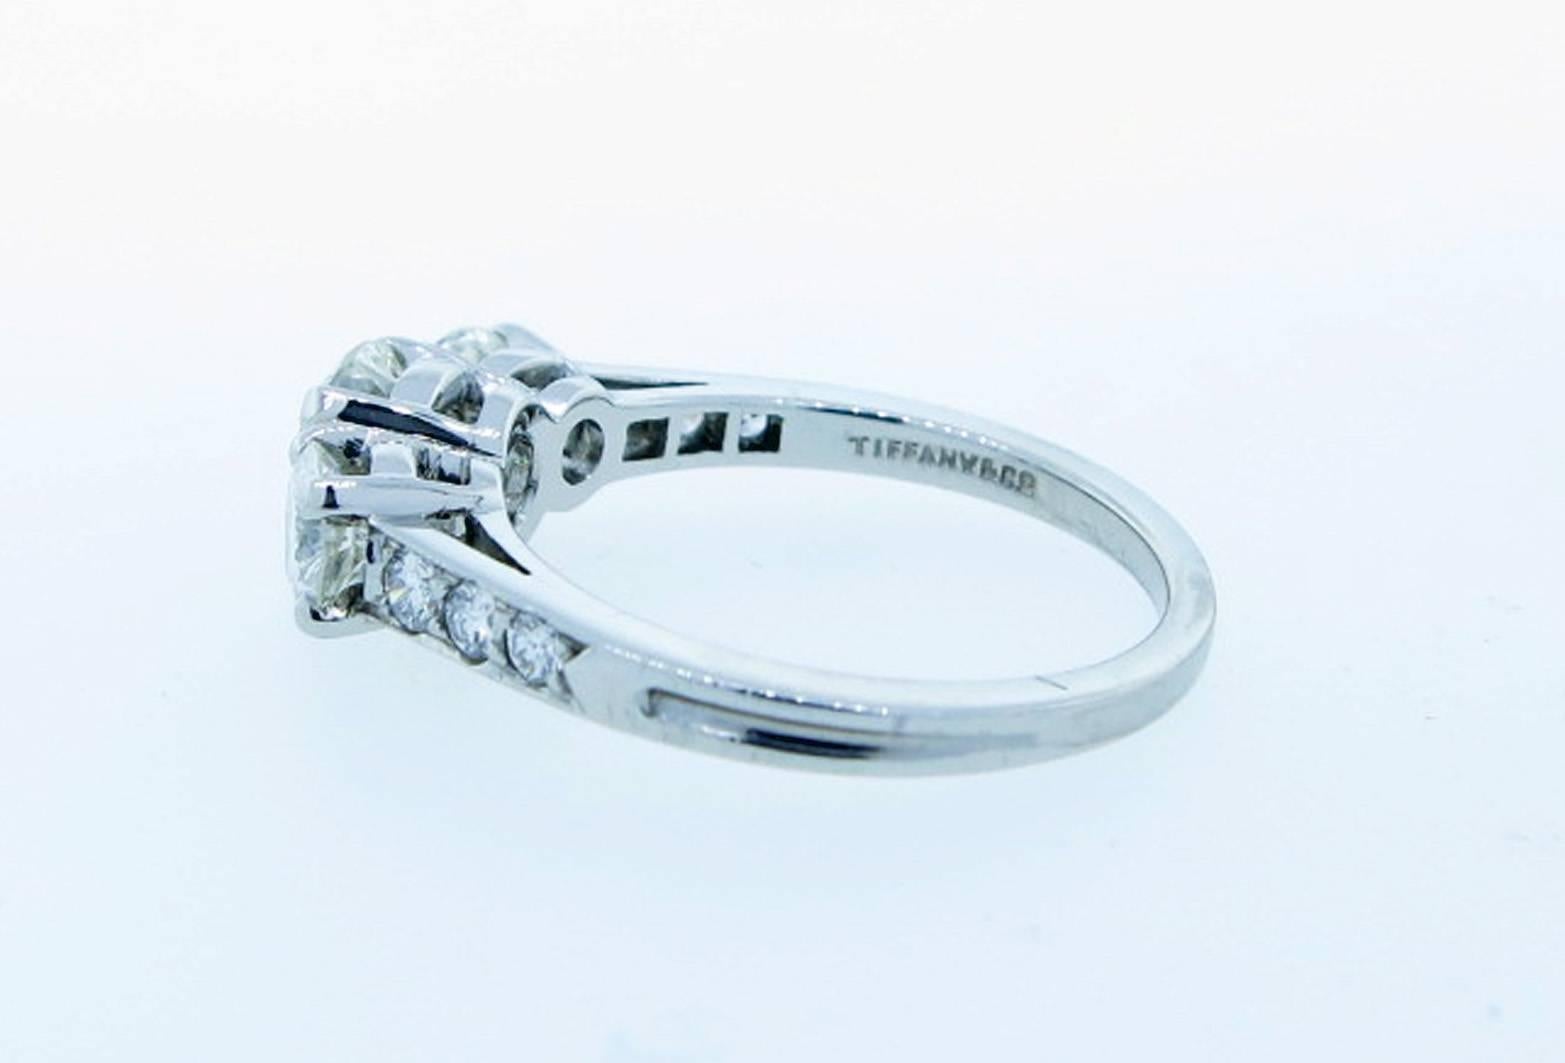 Timeless design Tiffany three stone diamond ring prong set in platinum with a center round brilliant cut diamond weighing approx .70cts. with a prong set diamond on each side, total diamond weight approx 1.25cts. Each side of the shank is bead set